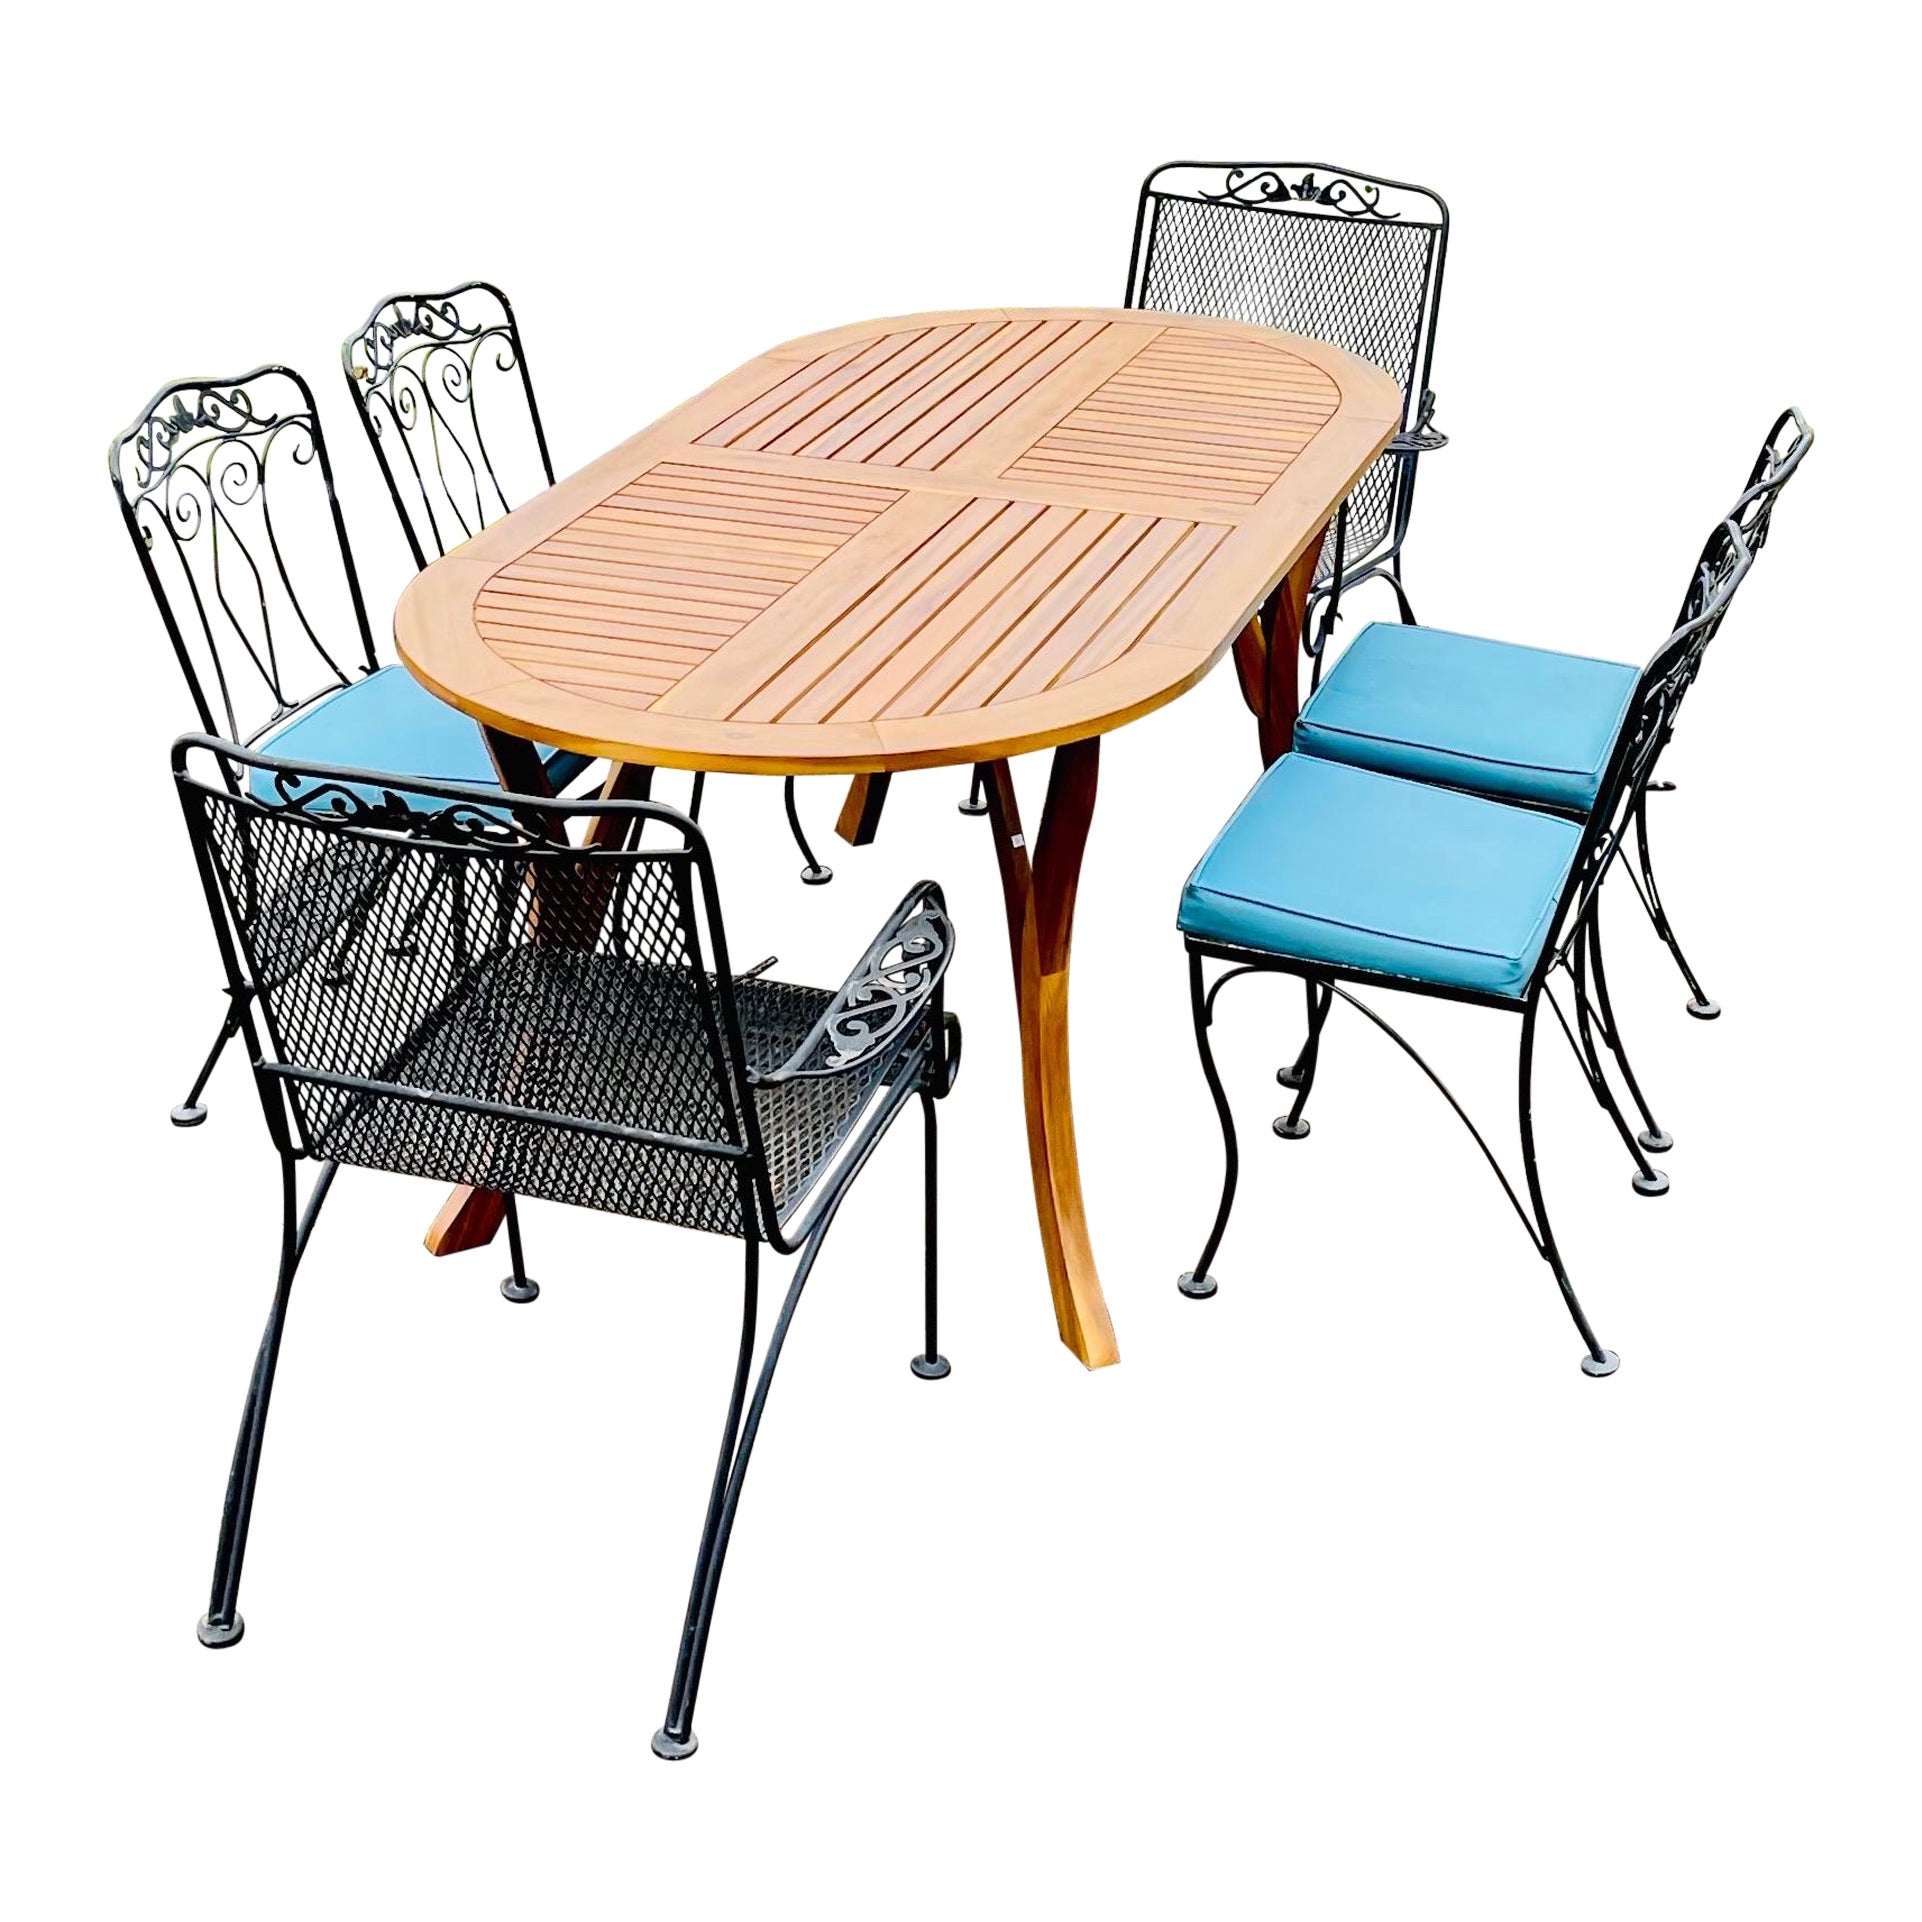 Vintage Wrought Iron Patio Furniture Seating Chairs with Teak Table For Sale